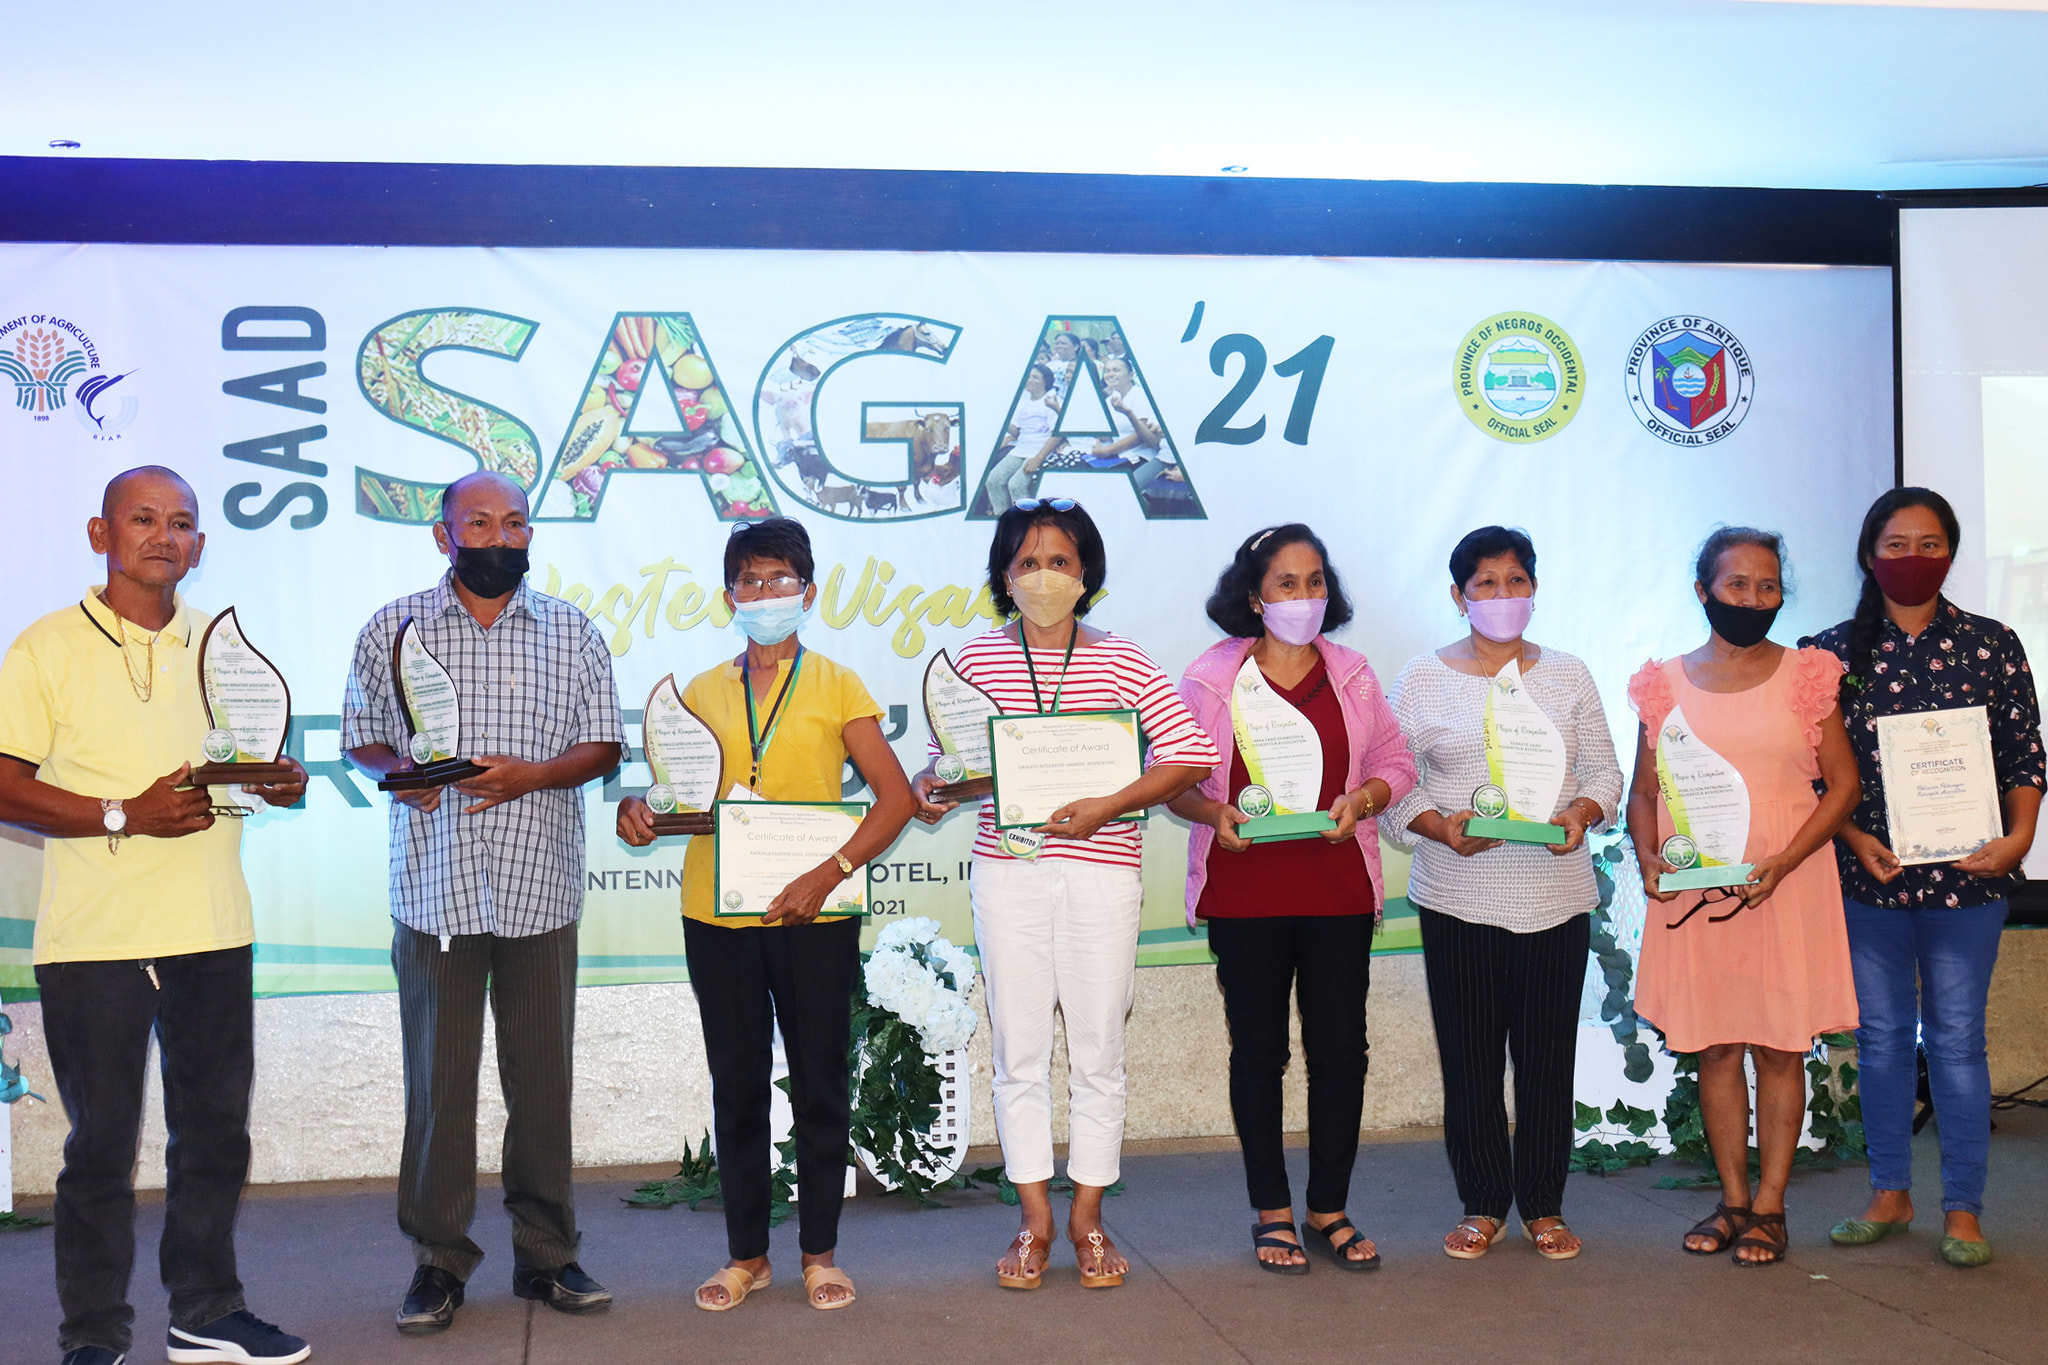 12 top performing agri-fishery partners for SAAD implementation in Western Visayas cited